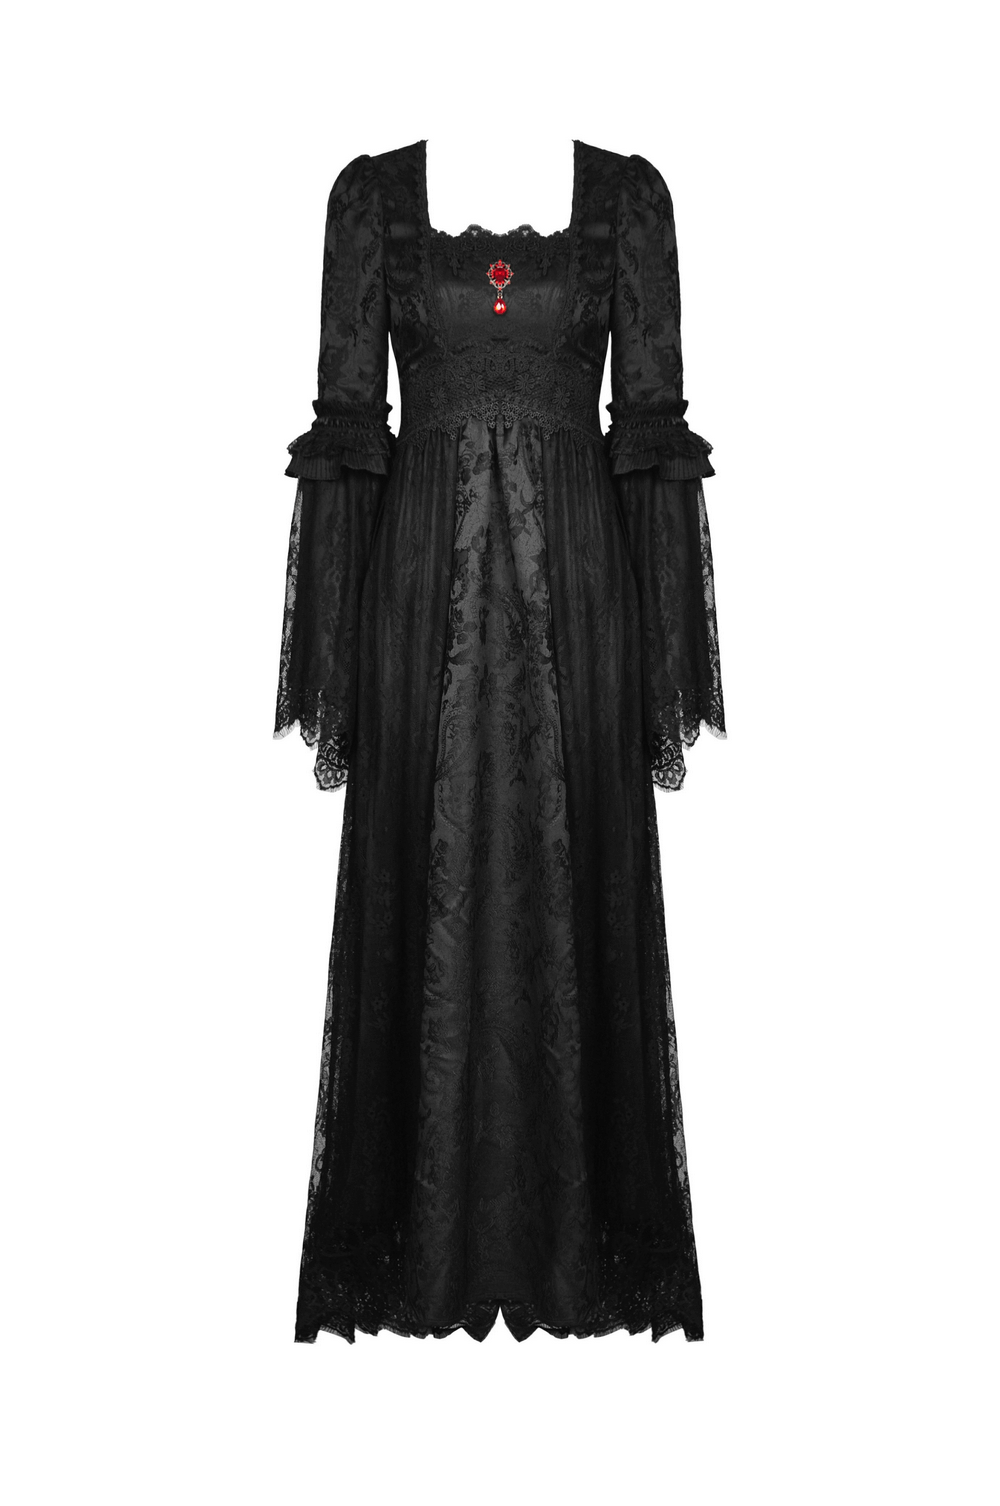 Black Gothic Long Sleeves Lace Maxi Dress with Red Brooch